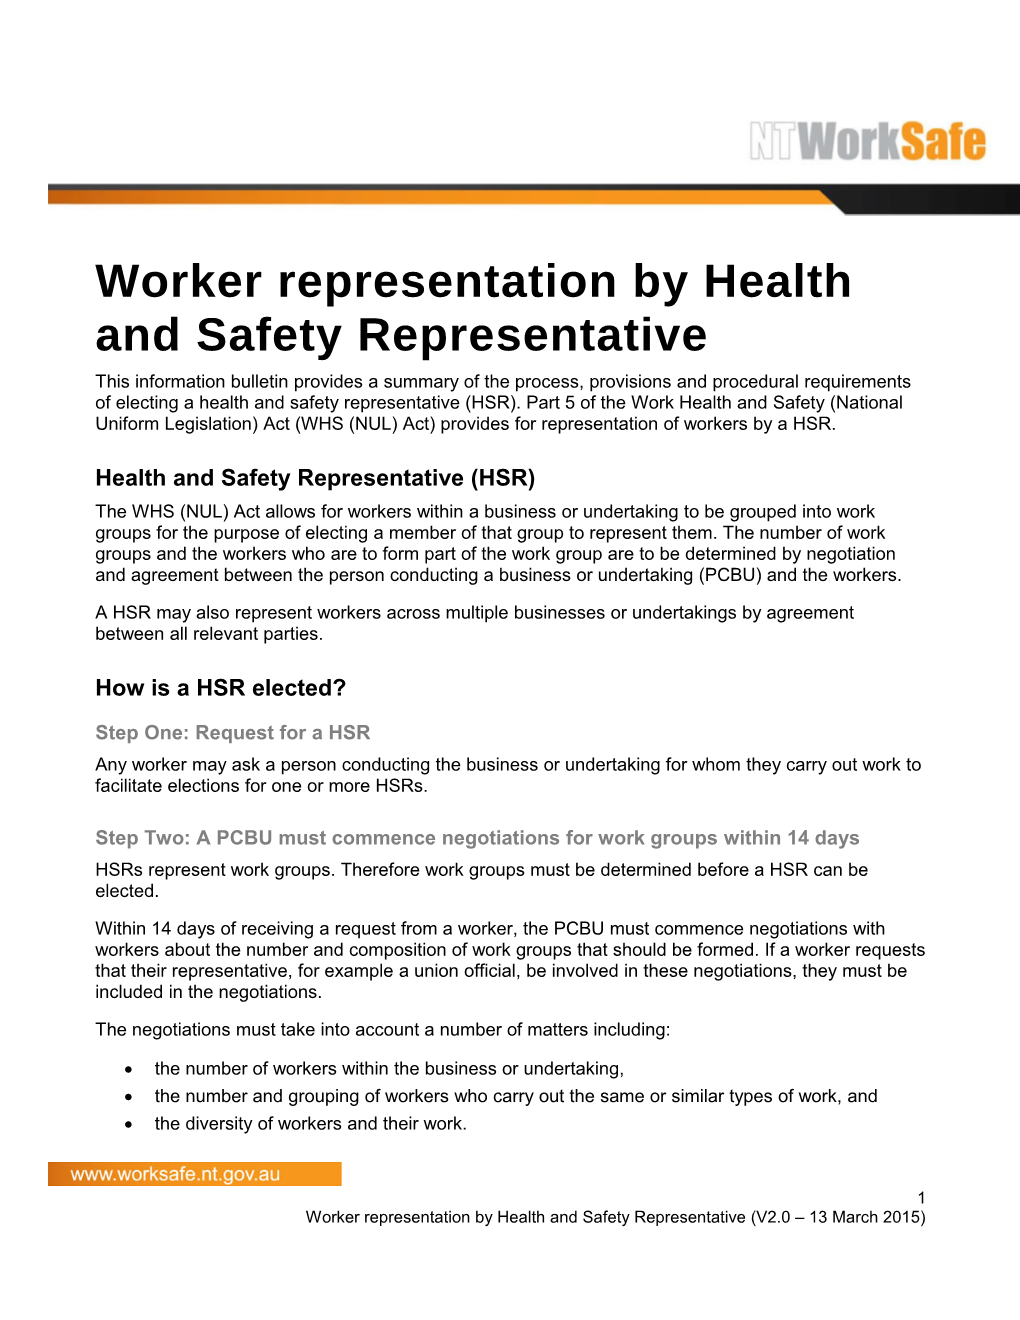 Worker Representation by Health and Safety Representative (HSR)